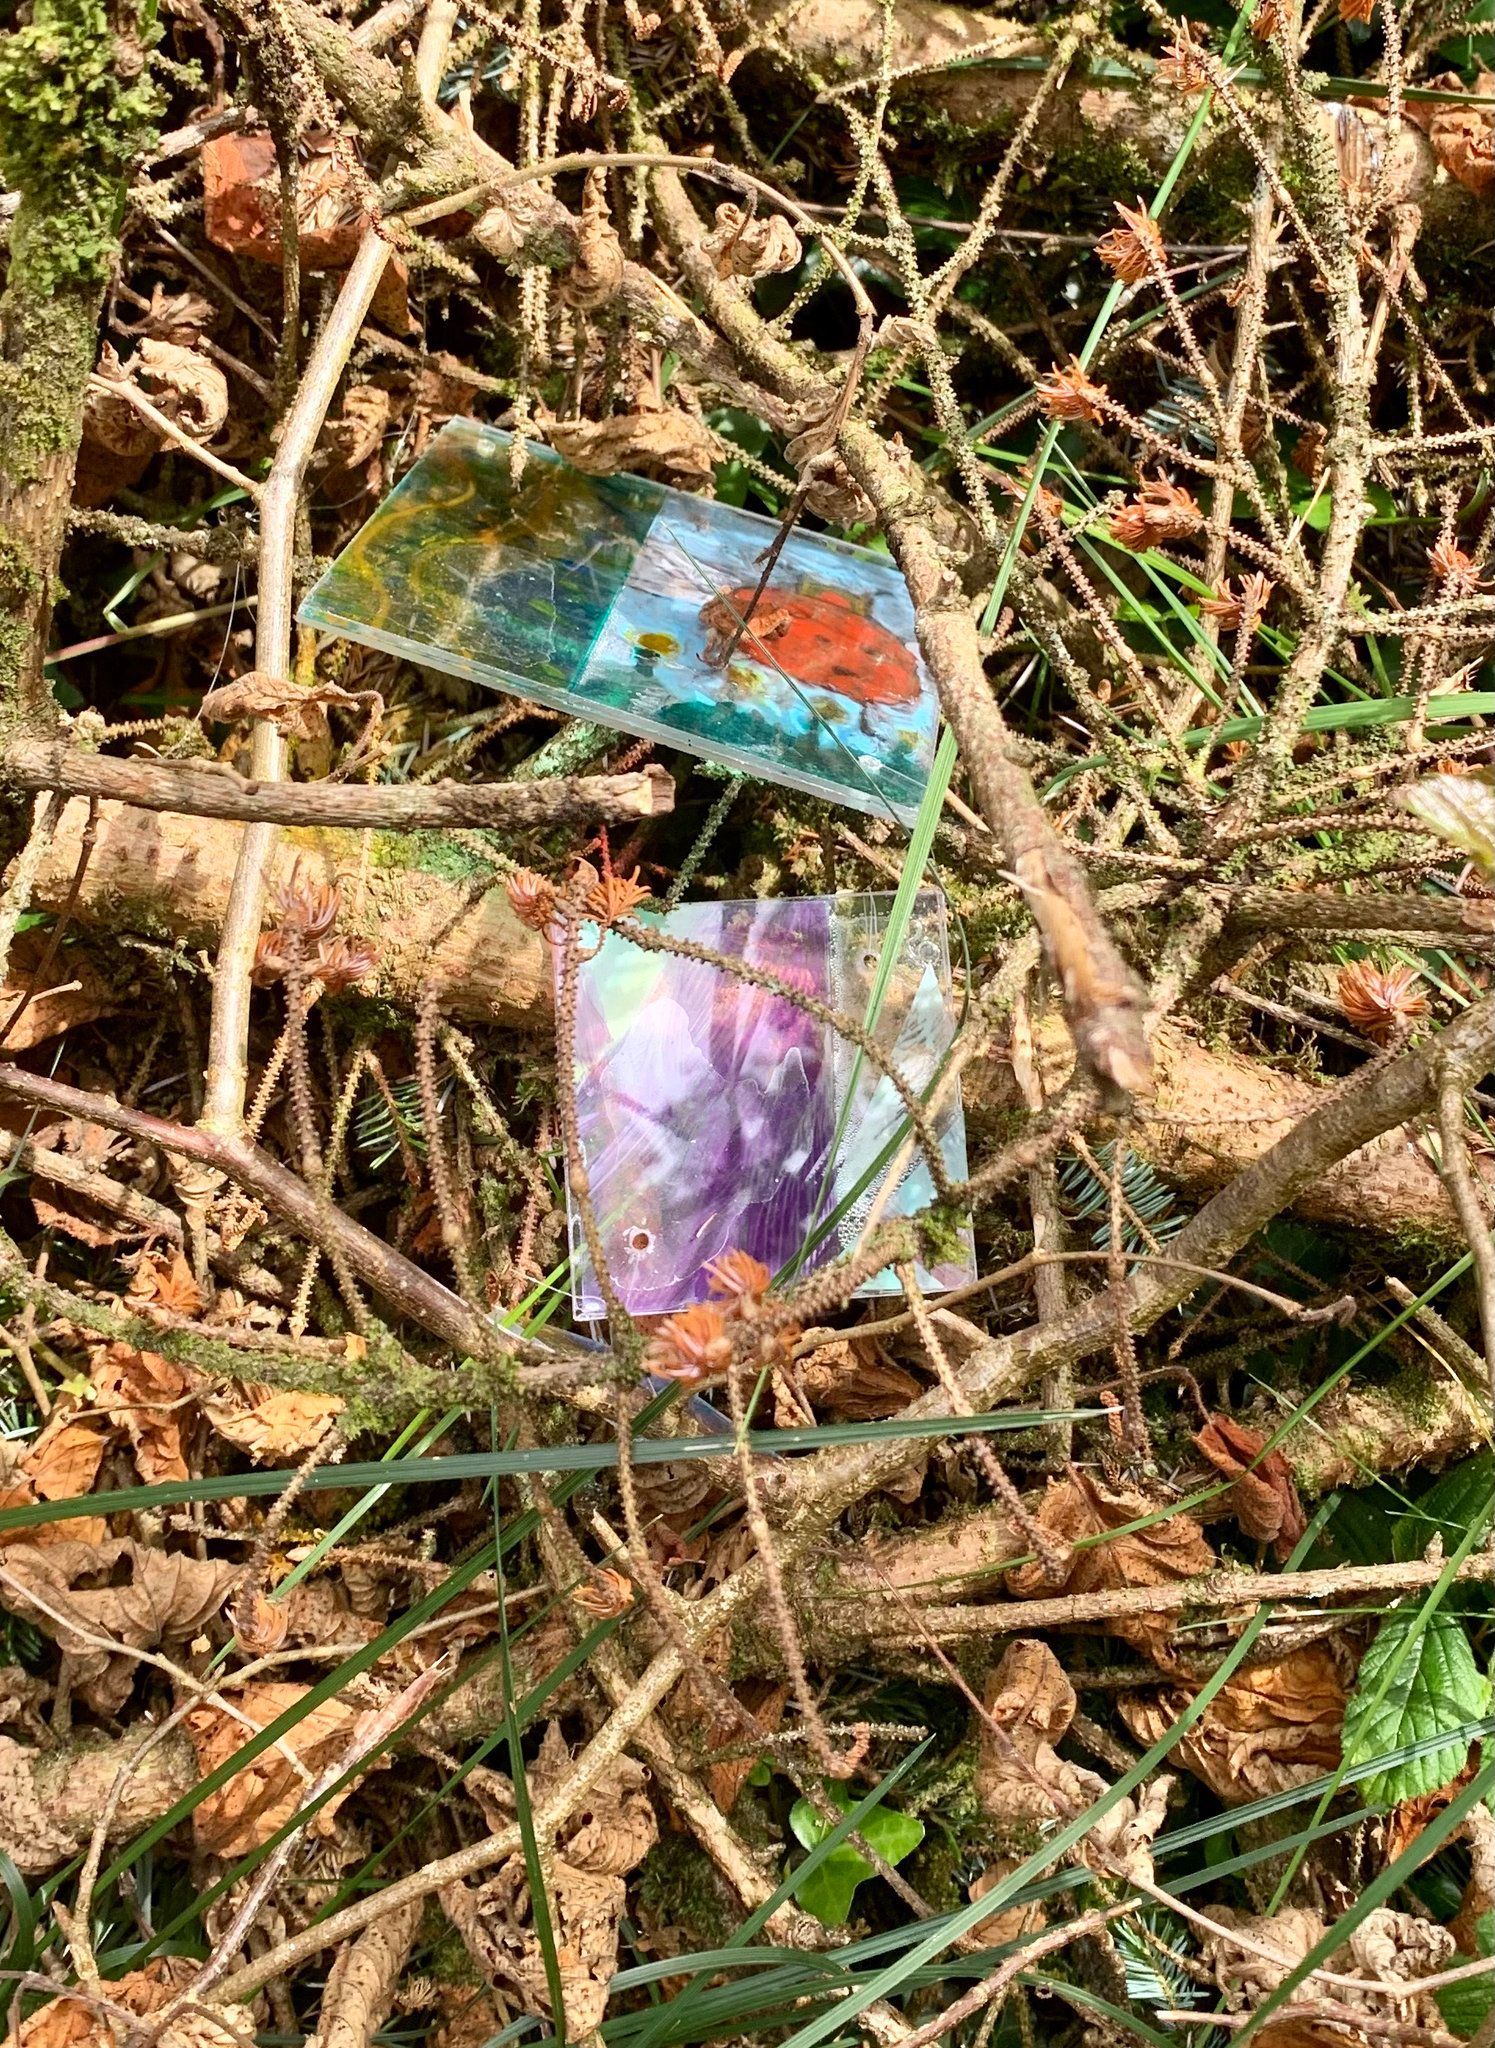 Artworks which formed part of the Sliabh Beagh Arts trail were vandalised over the weekend.